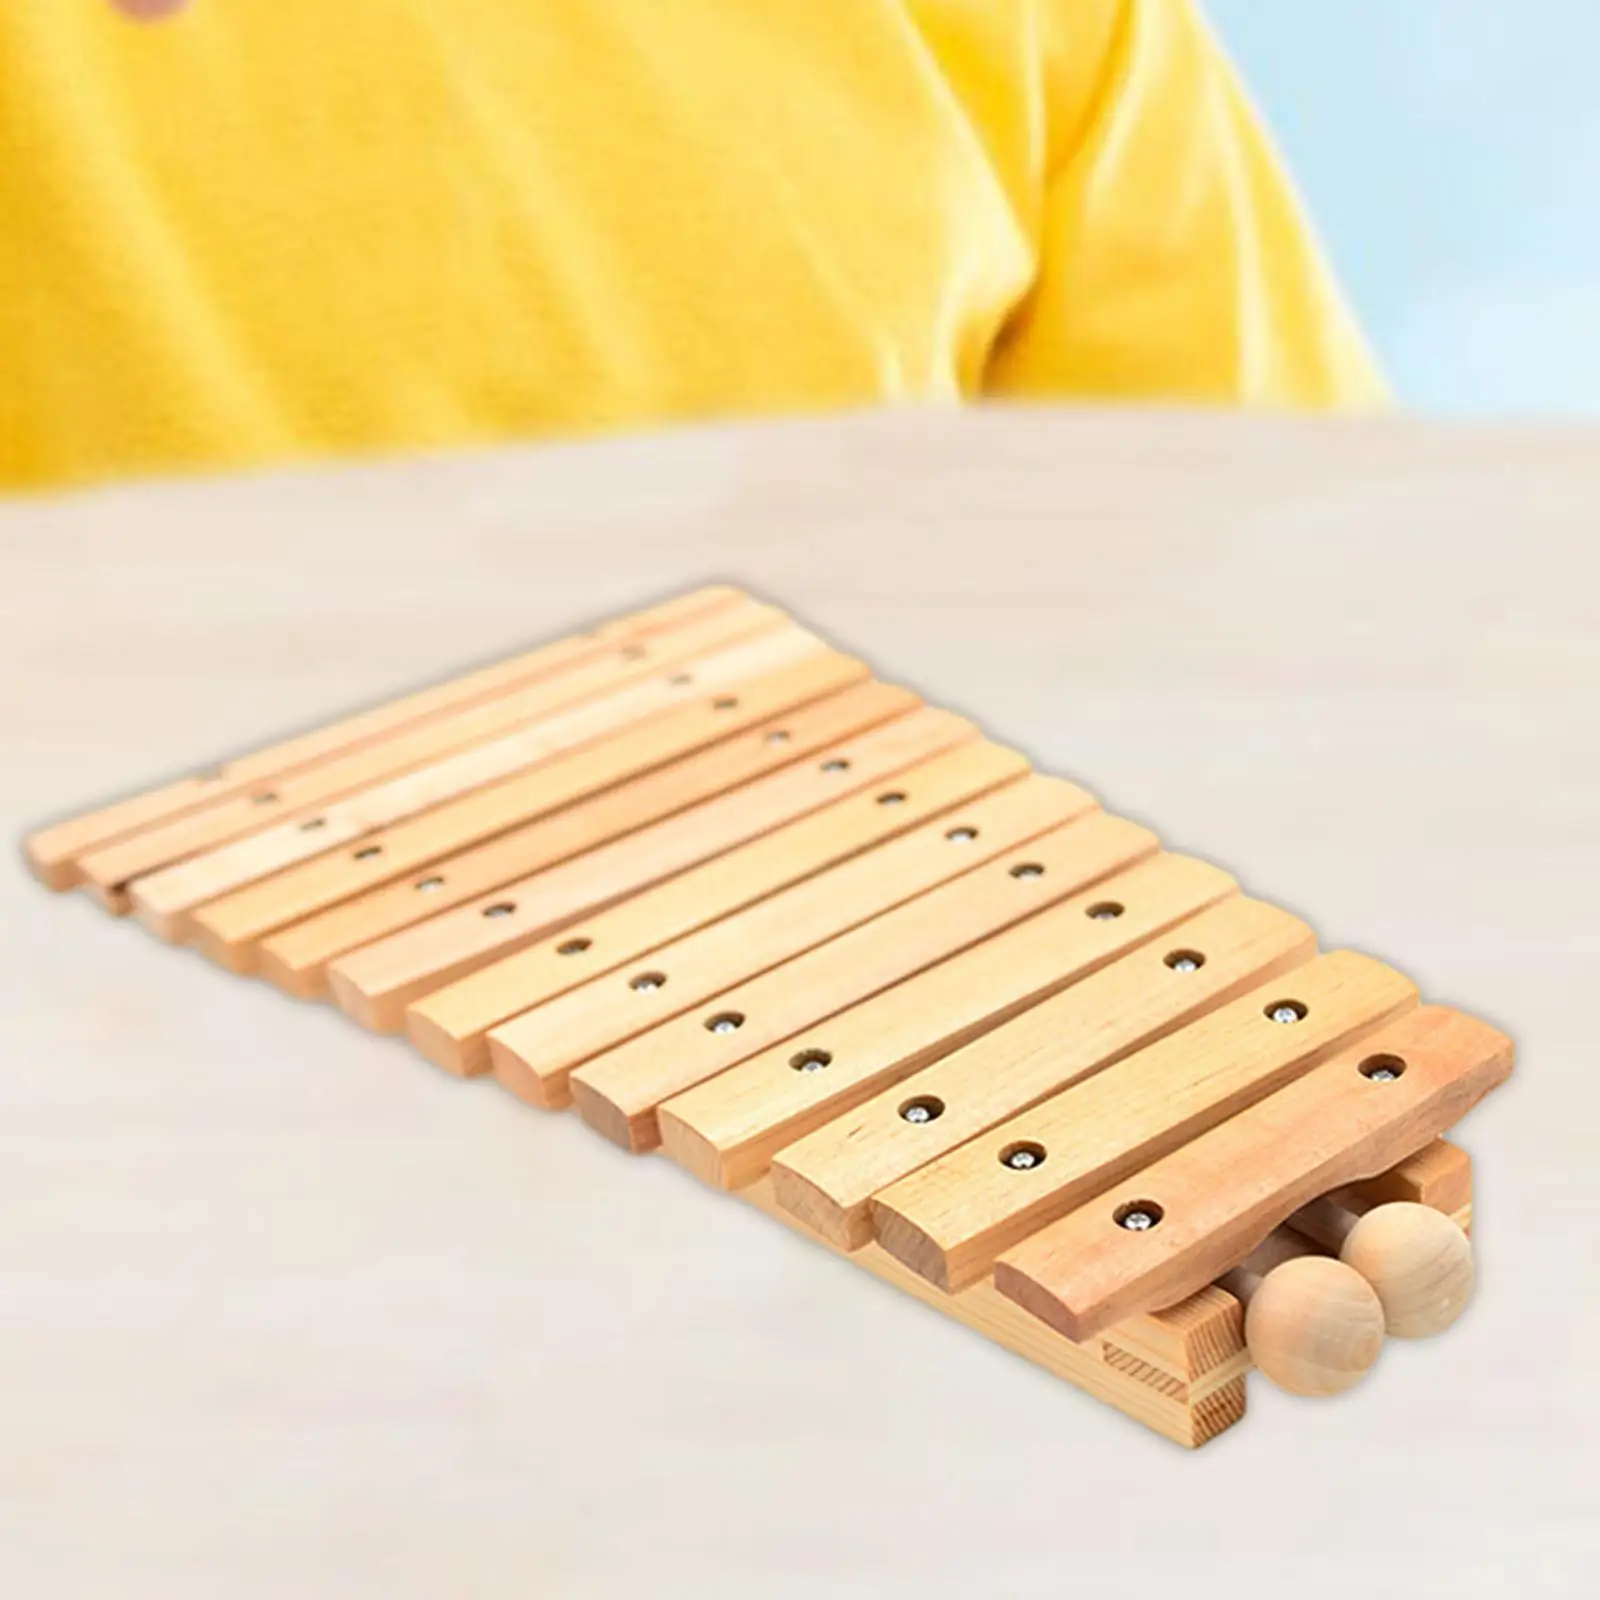 13 Note Glockenspiel Hand Knock Piano Toy for Home Outside Family Sessions